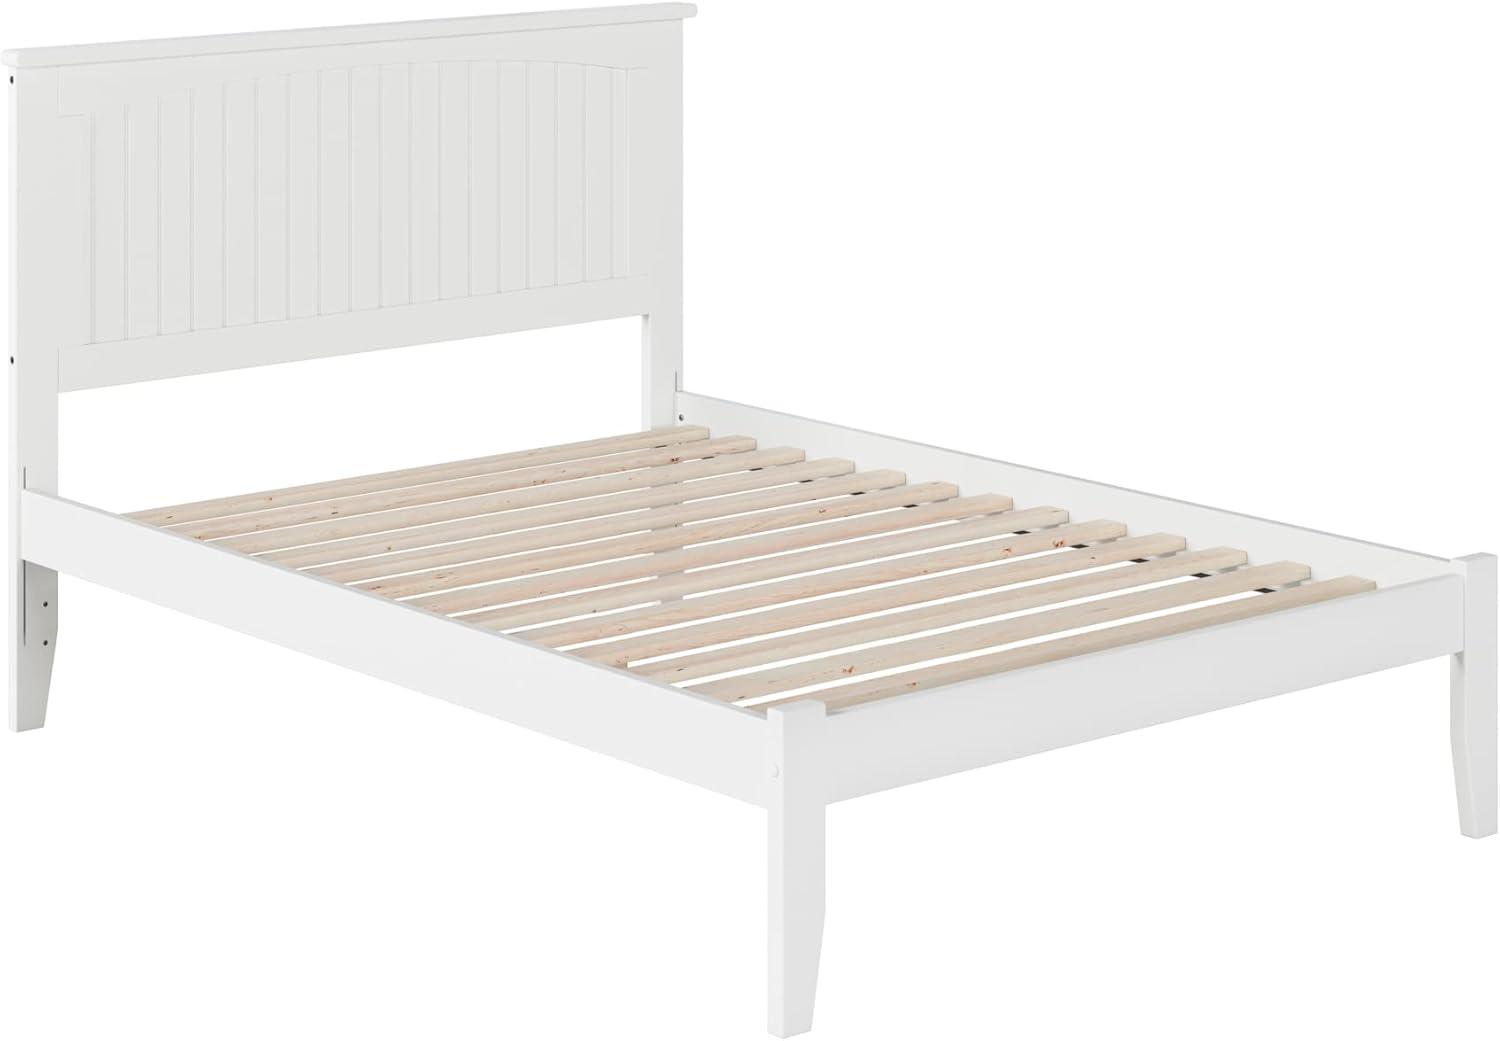 Nantucket Classic Cottage Full/Double Wood Frame Bed with Drawer, White